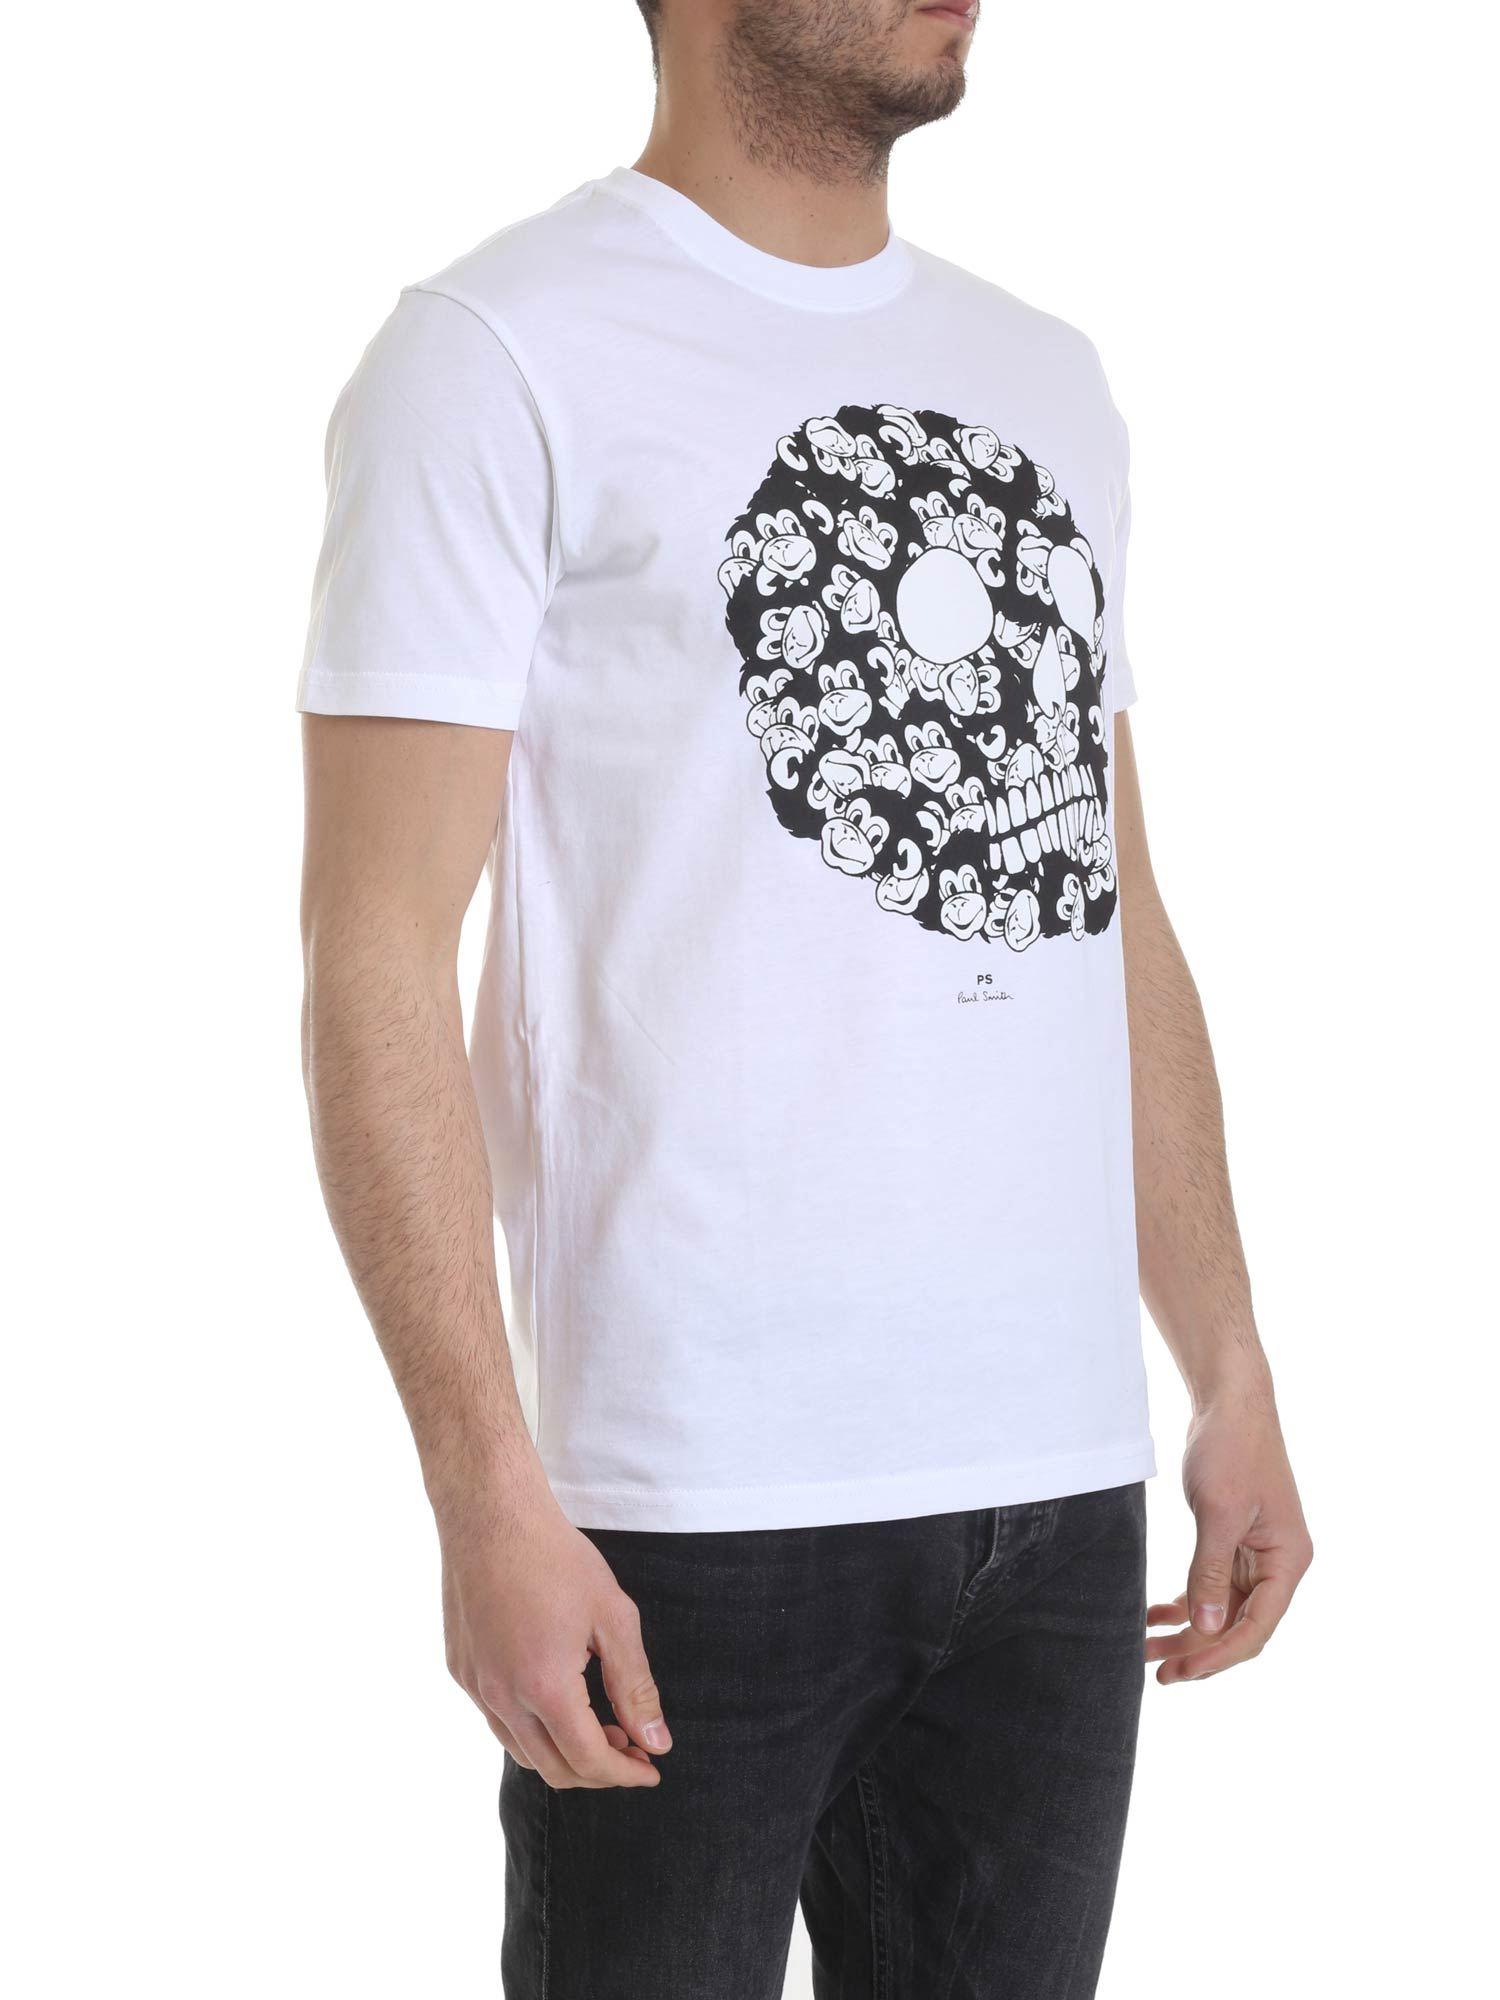 PS by Paul Smith T-shirt in White for Men - Lyst